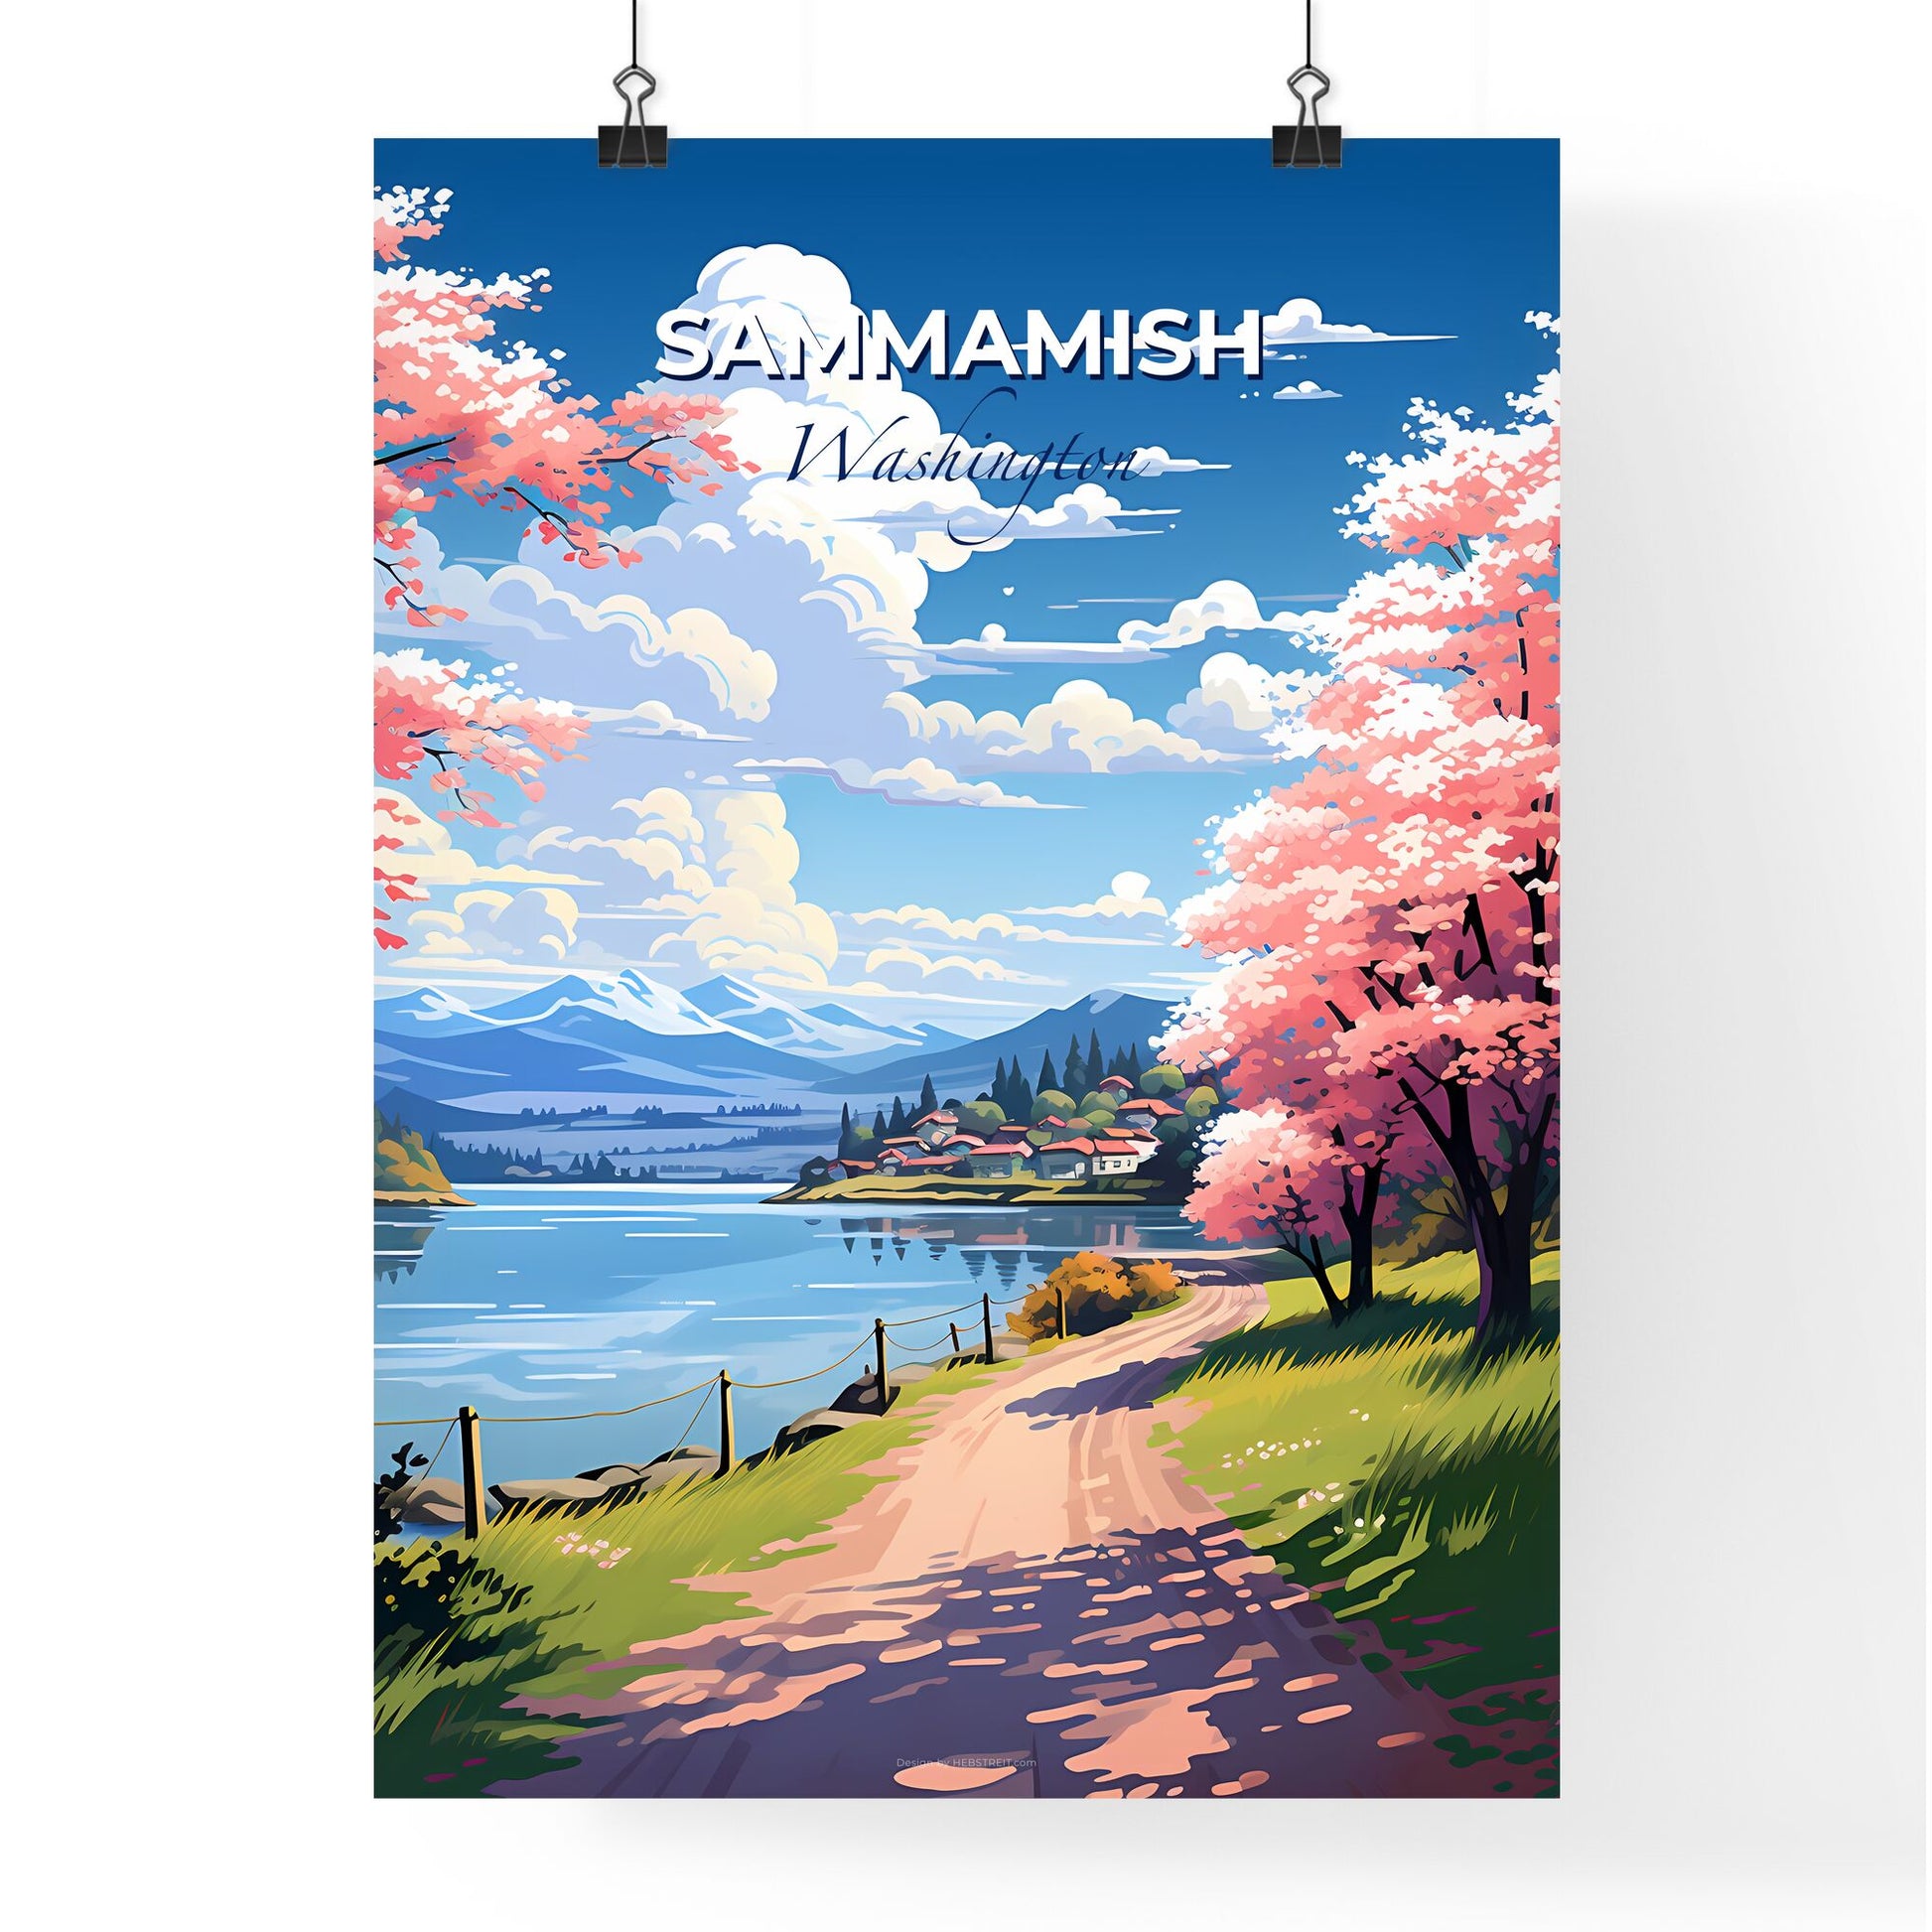 Sammamish, Washington, A Poster of a road leading to a lake with pink flowers Default Title